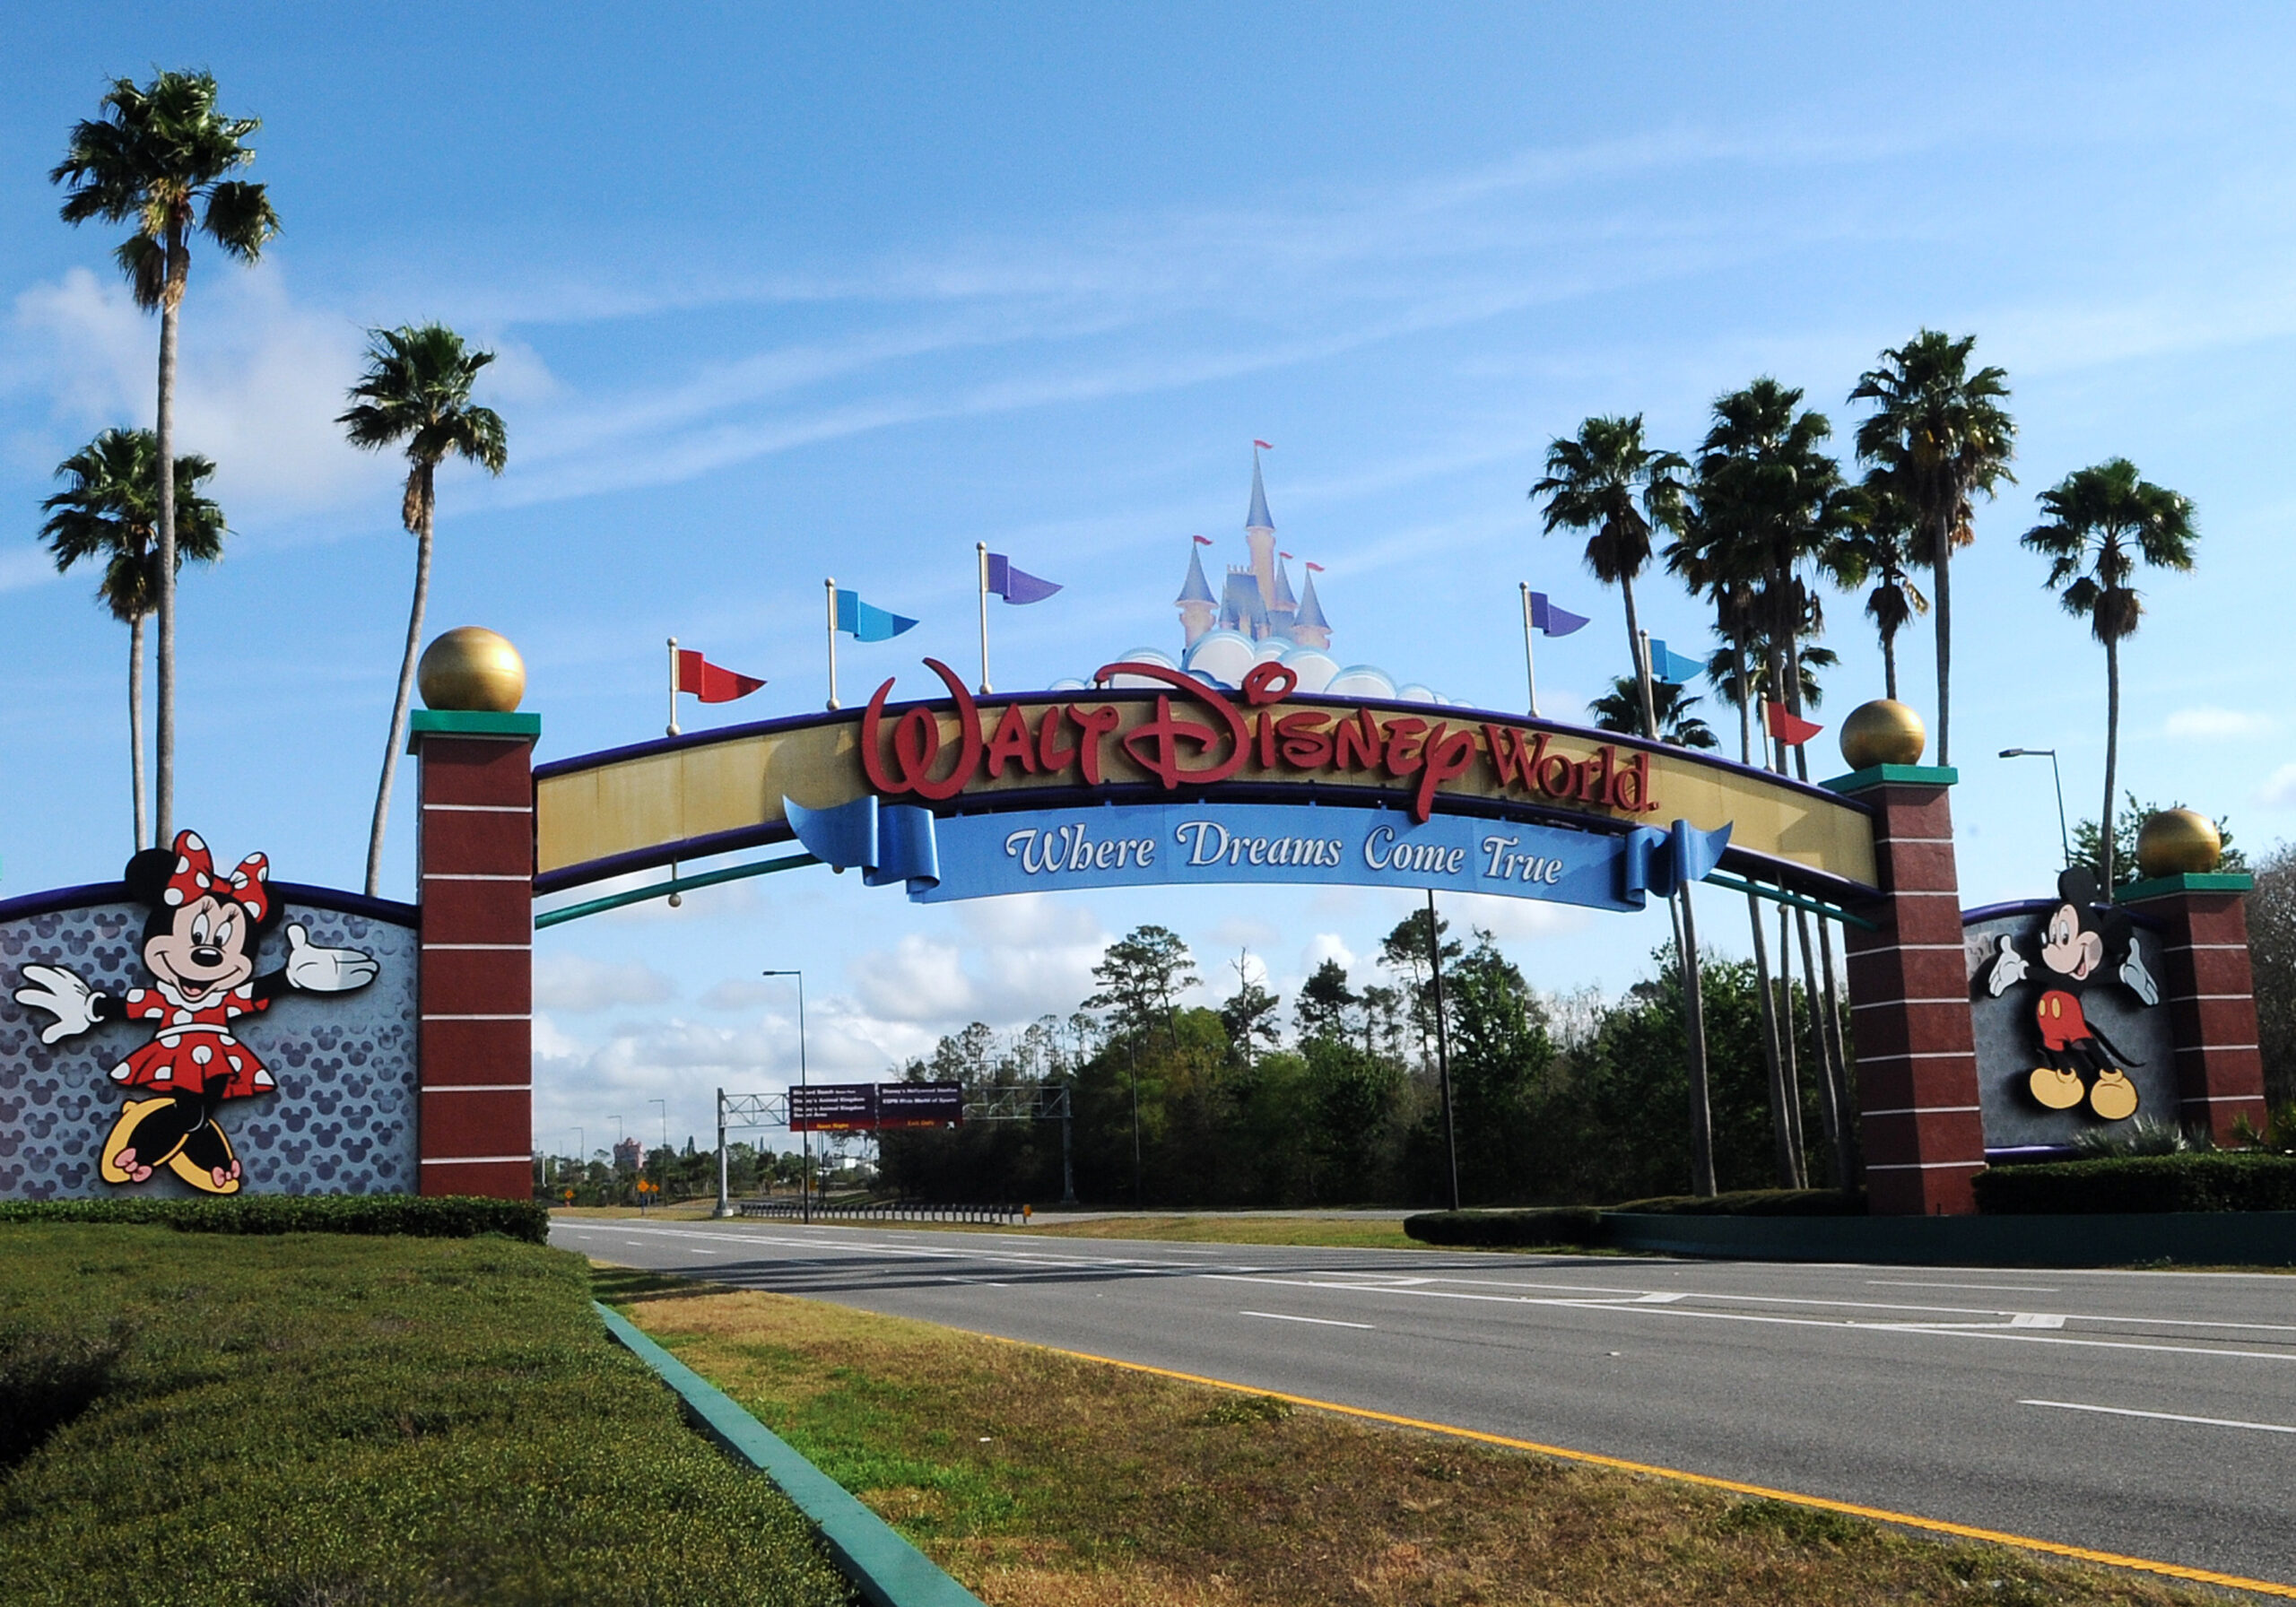 The entrance to Disney World on March 16, 2020. Photo by Paul Hennessy/SOPA Images/LightRocket via Getty Images